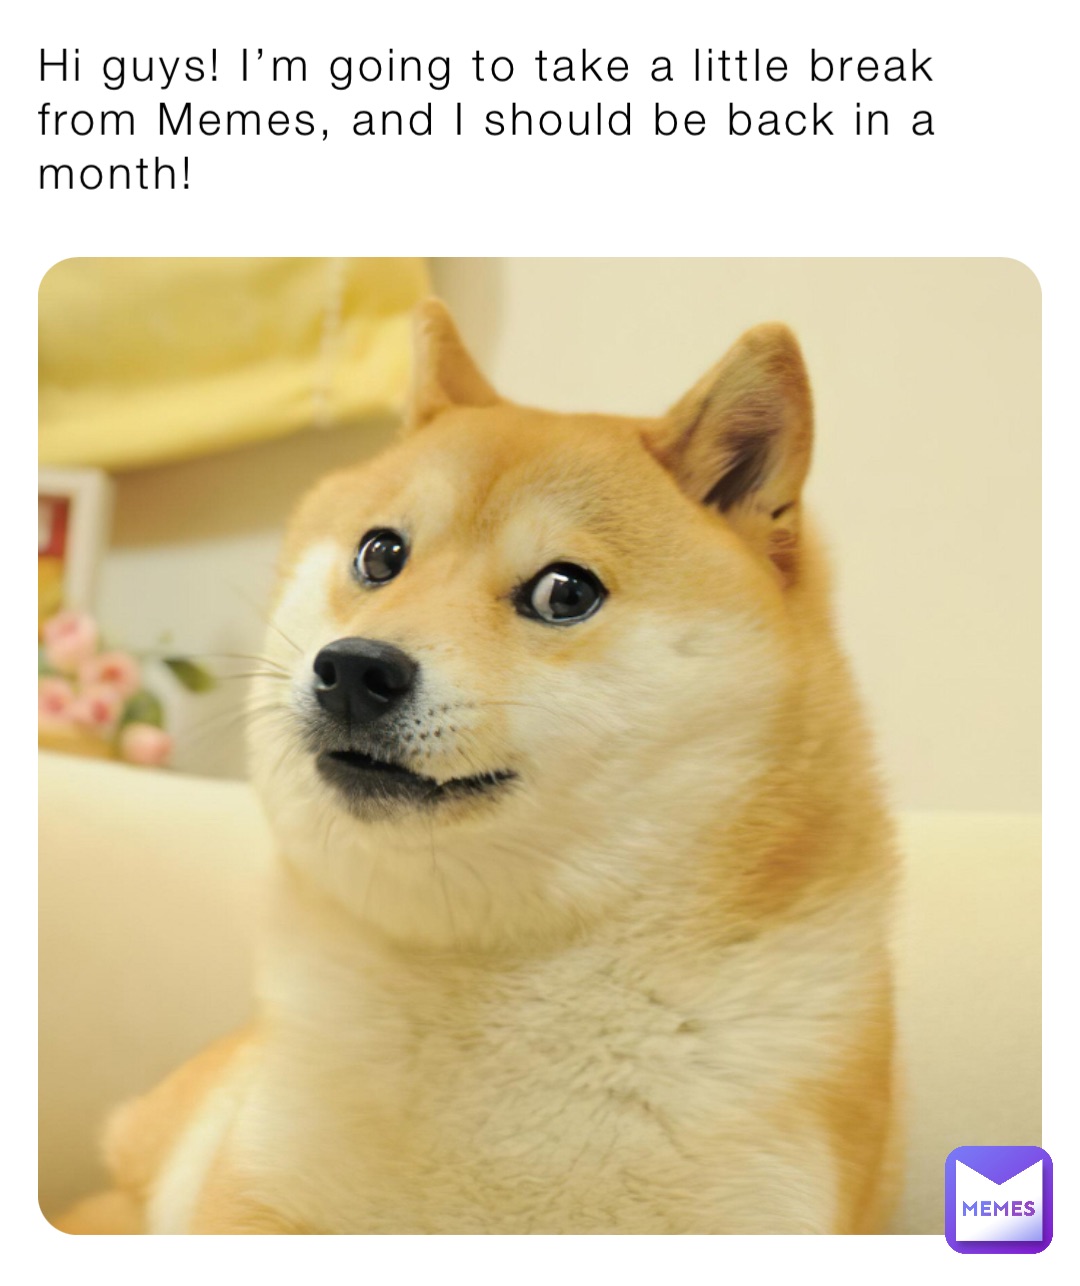 Hi guys! I’m going to take a little break from Memes, and I should be back in a month!